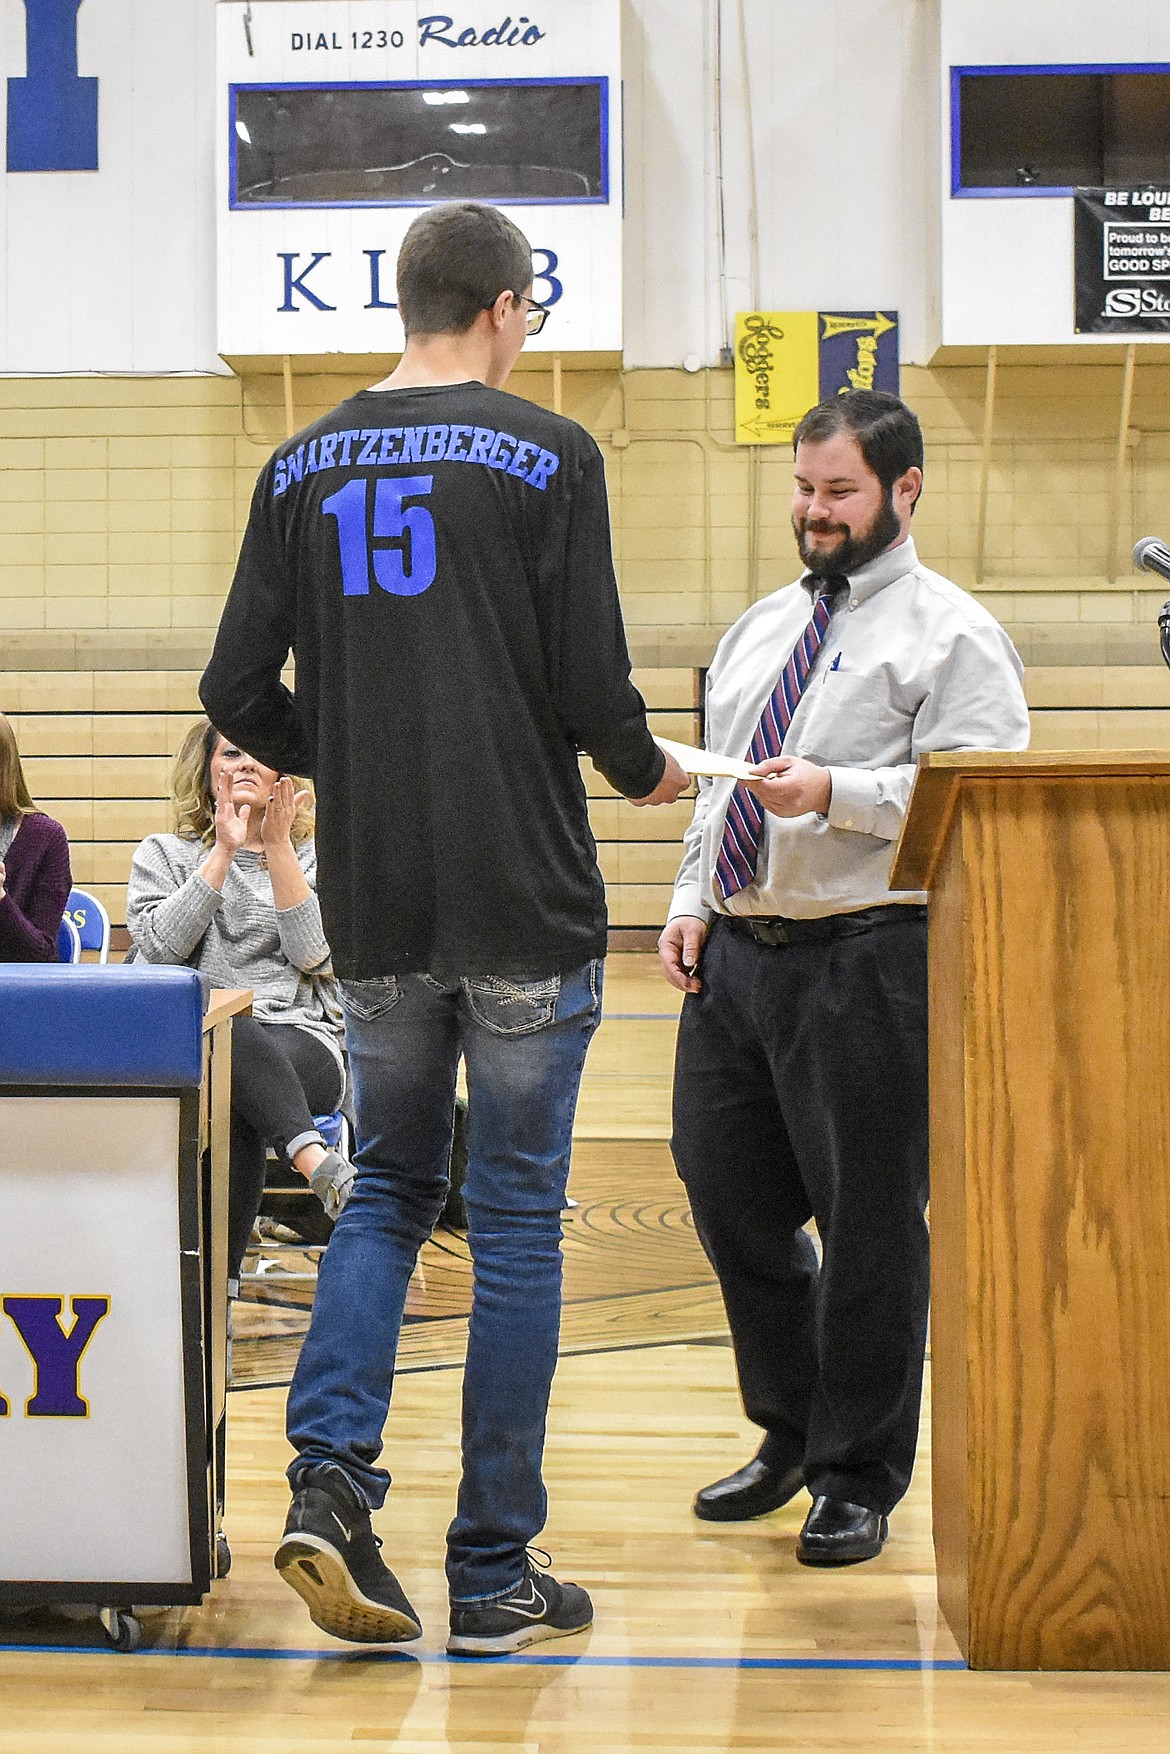 Libby High School boys soccer Head Coach Jeff Zwang presents the &#147;Most Valuable Player&#148; award to senior Austin Swartzenberger &#151; who was also named to Second Team All Conference &#151; during the Fall Awards Assembly Thursday. (Ben Kibbey/The Western News)